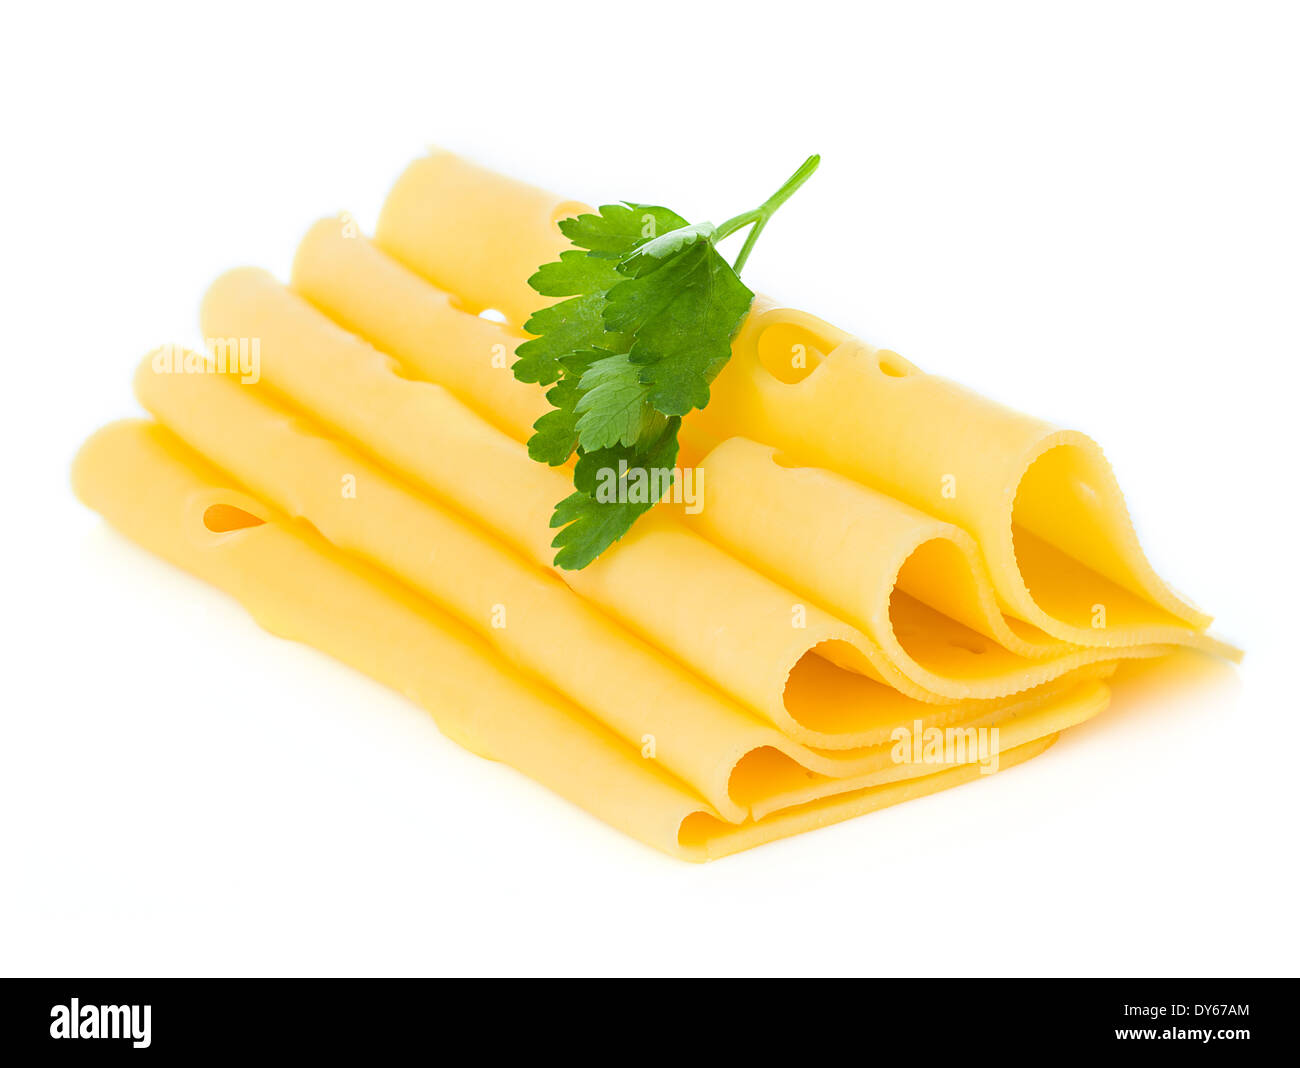 cheese slices on white background Stock Photo